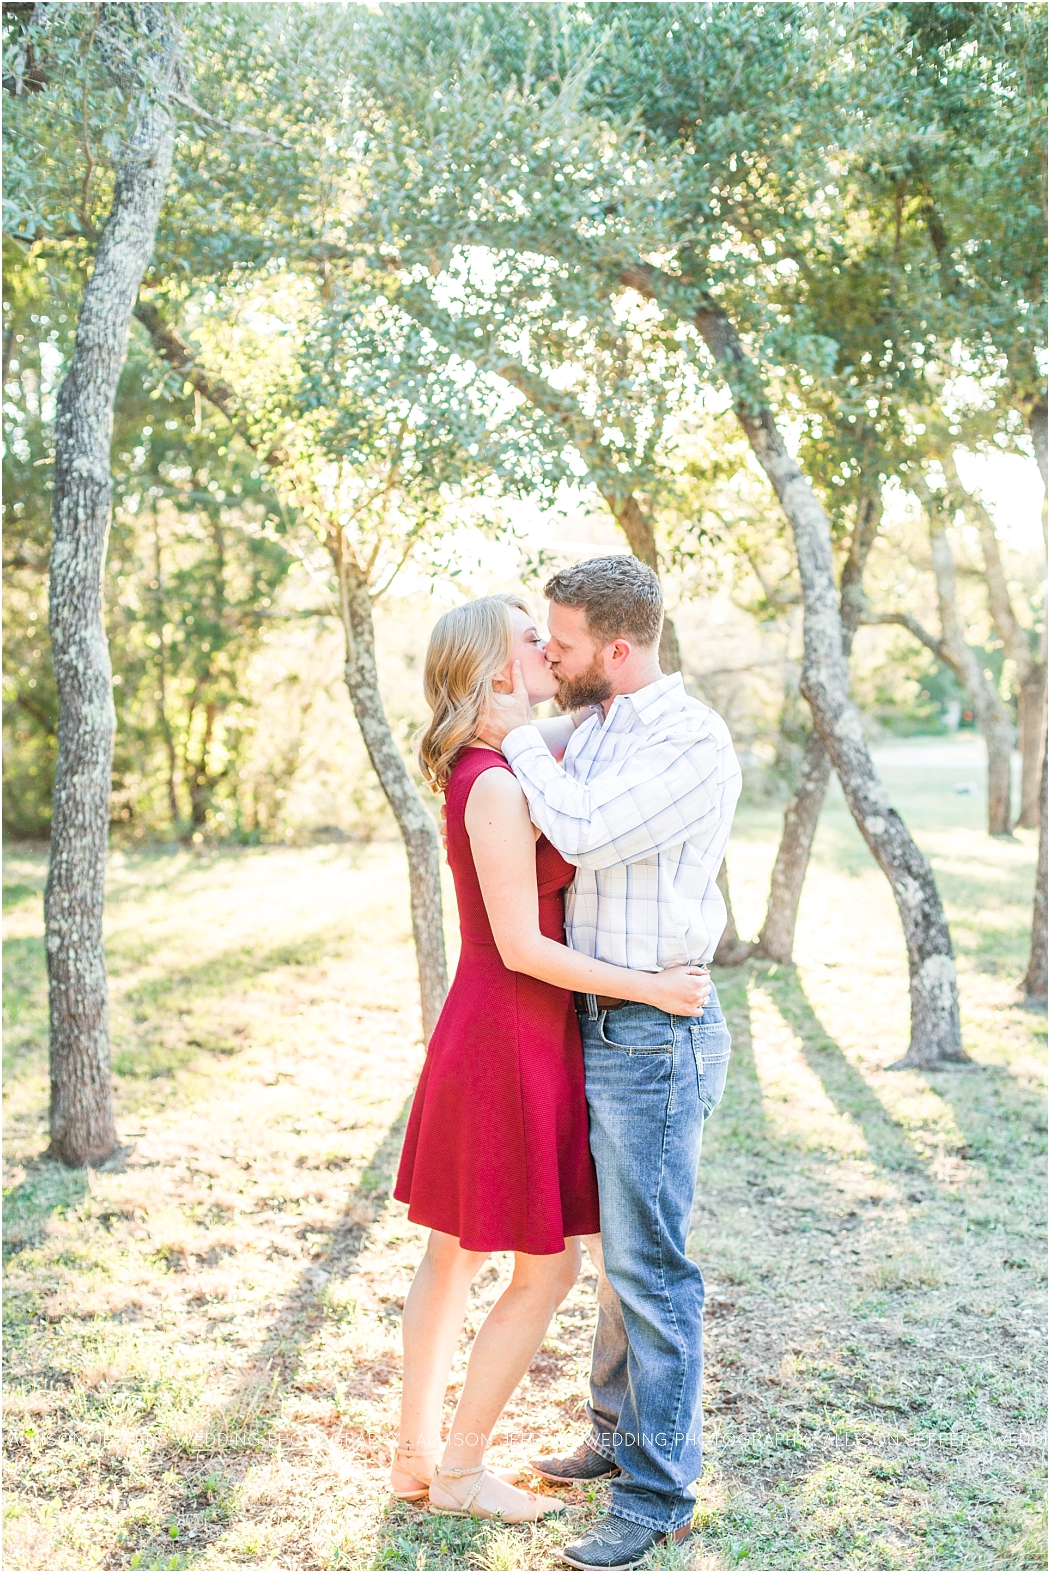 natural-engagement-session-in-austin-texas-by-allison-jeffers-wedding-photography_0018